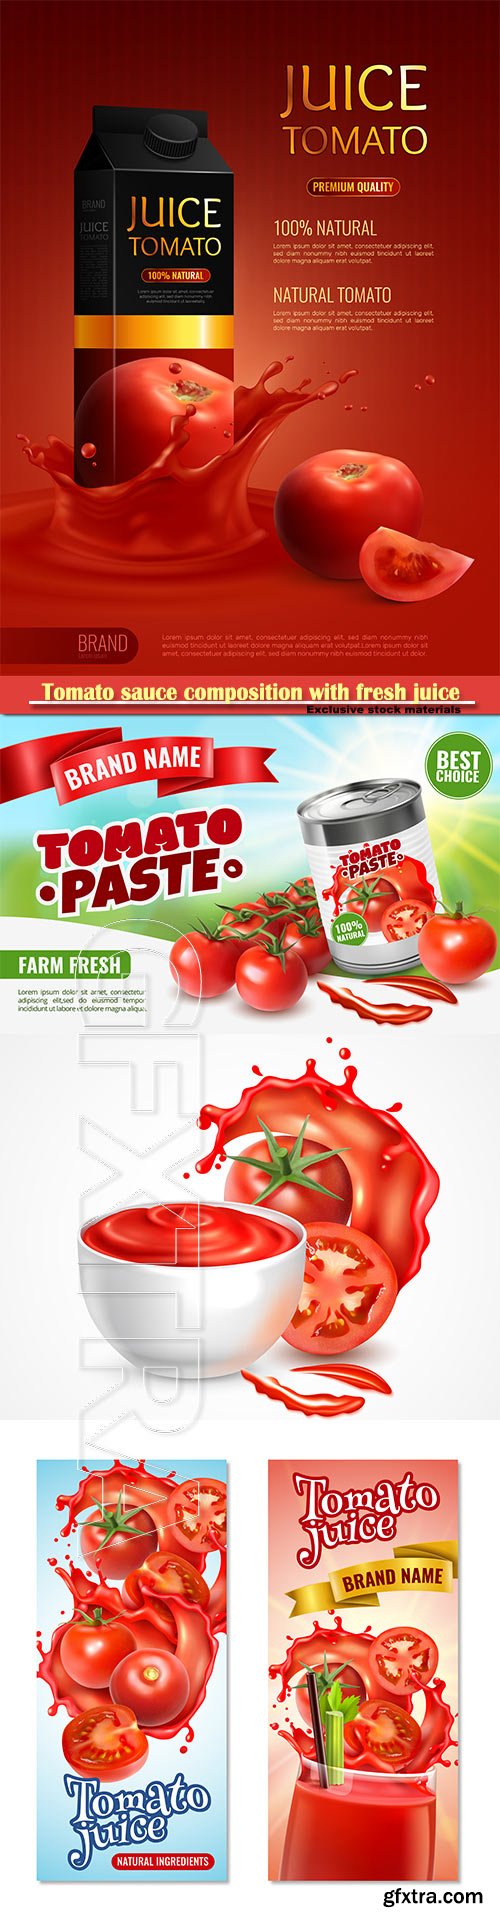 Tomato sauce composition with fresh juice vector illustration